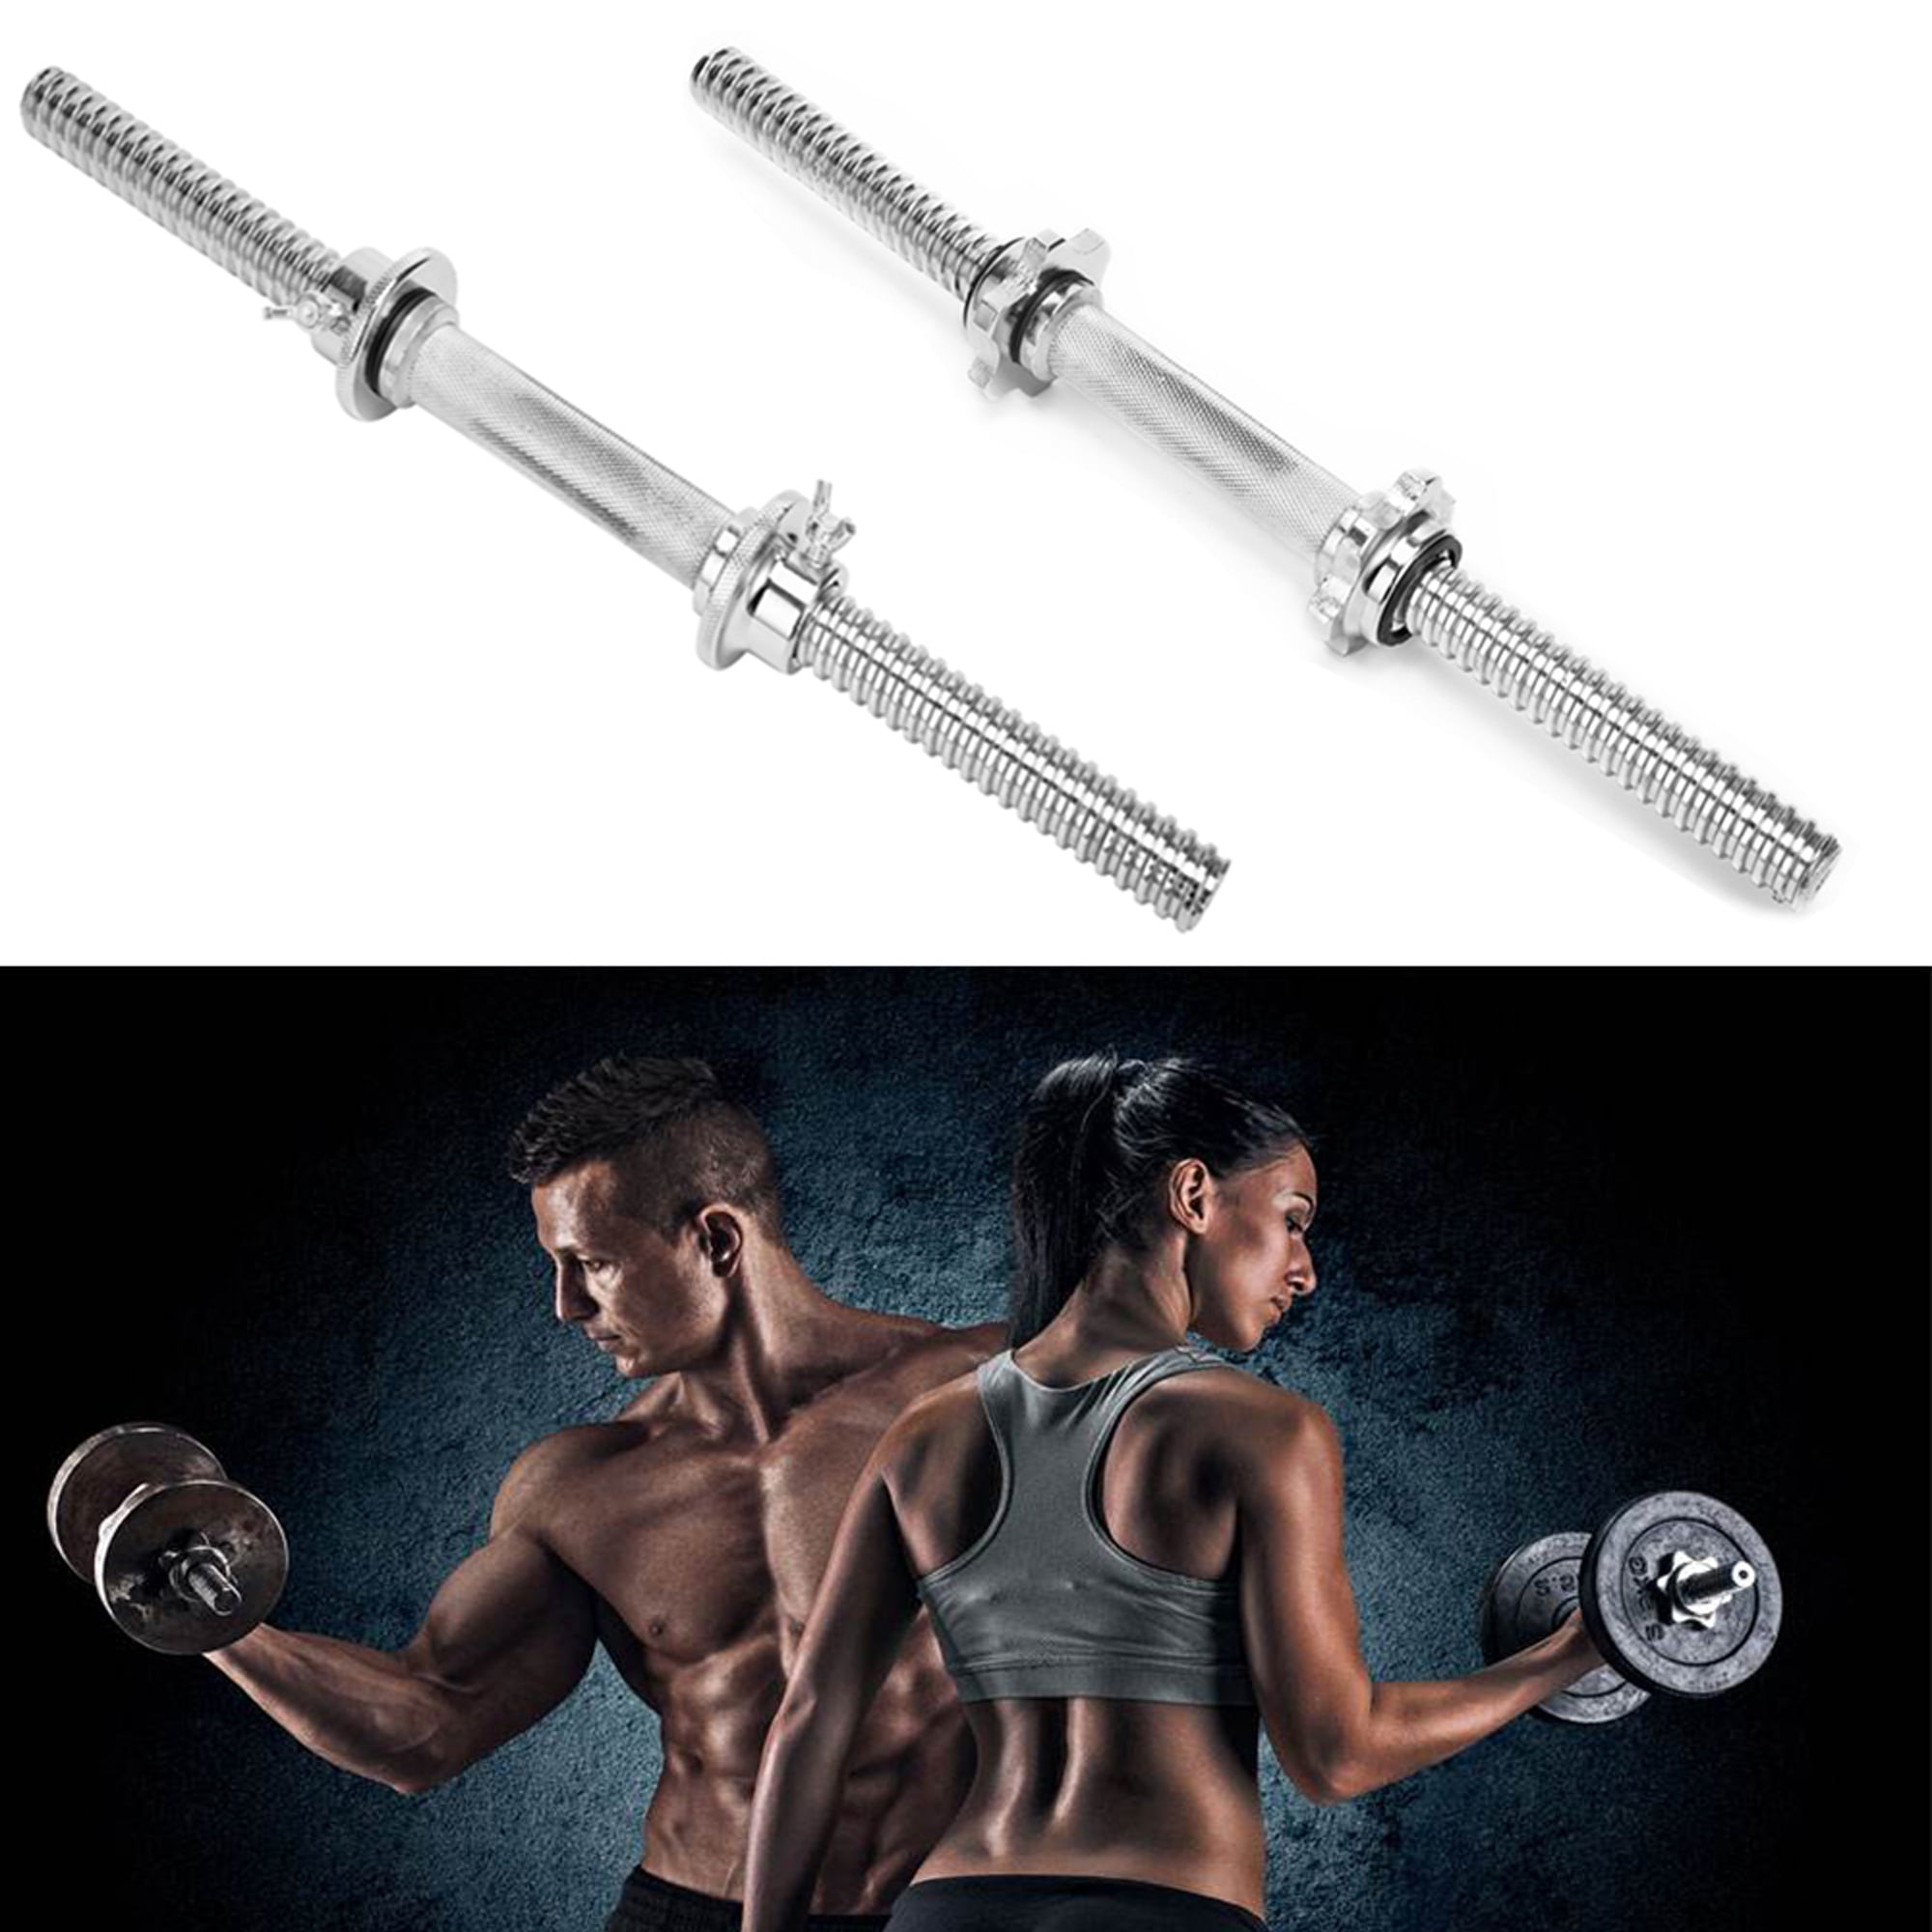 2x Dumbbell Bars & Spinlock Collars Weight Lifting Gym Dumbell Handles Set 45cm 